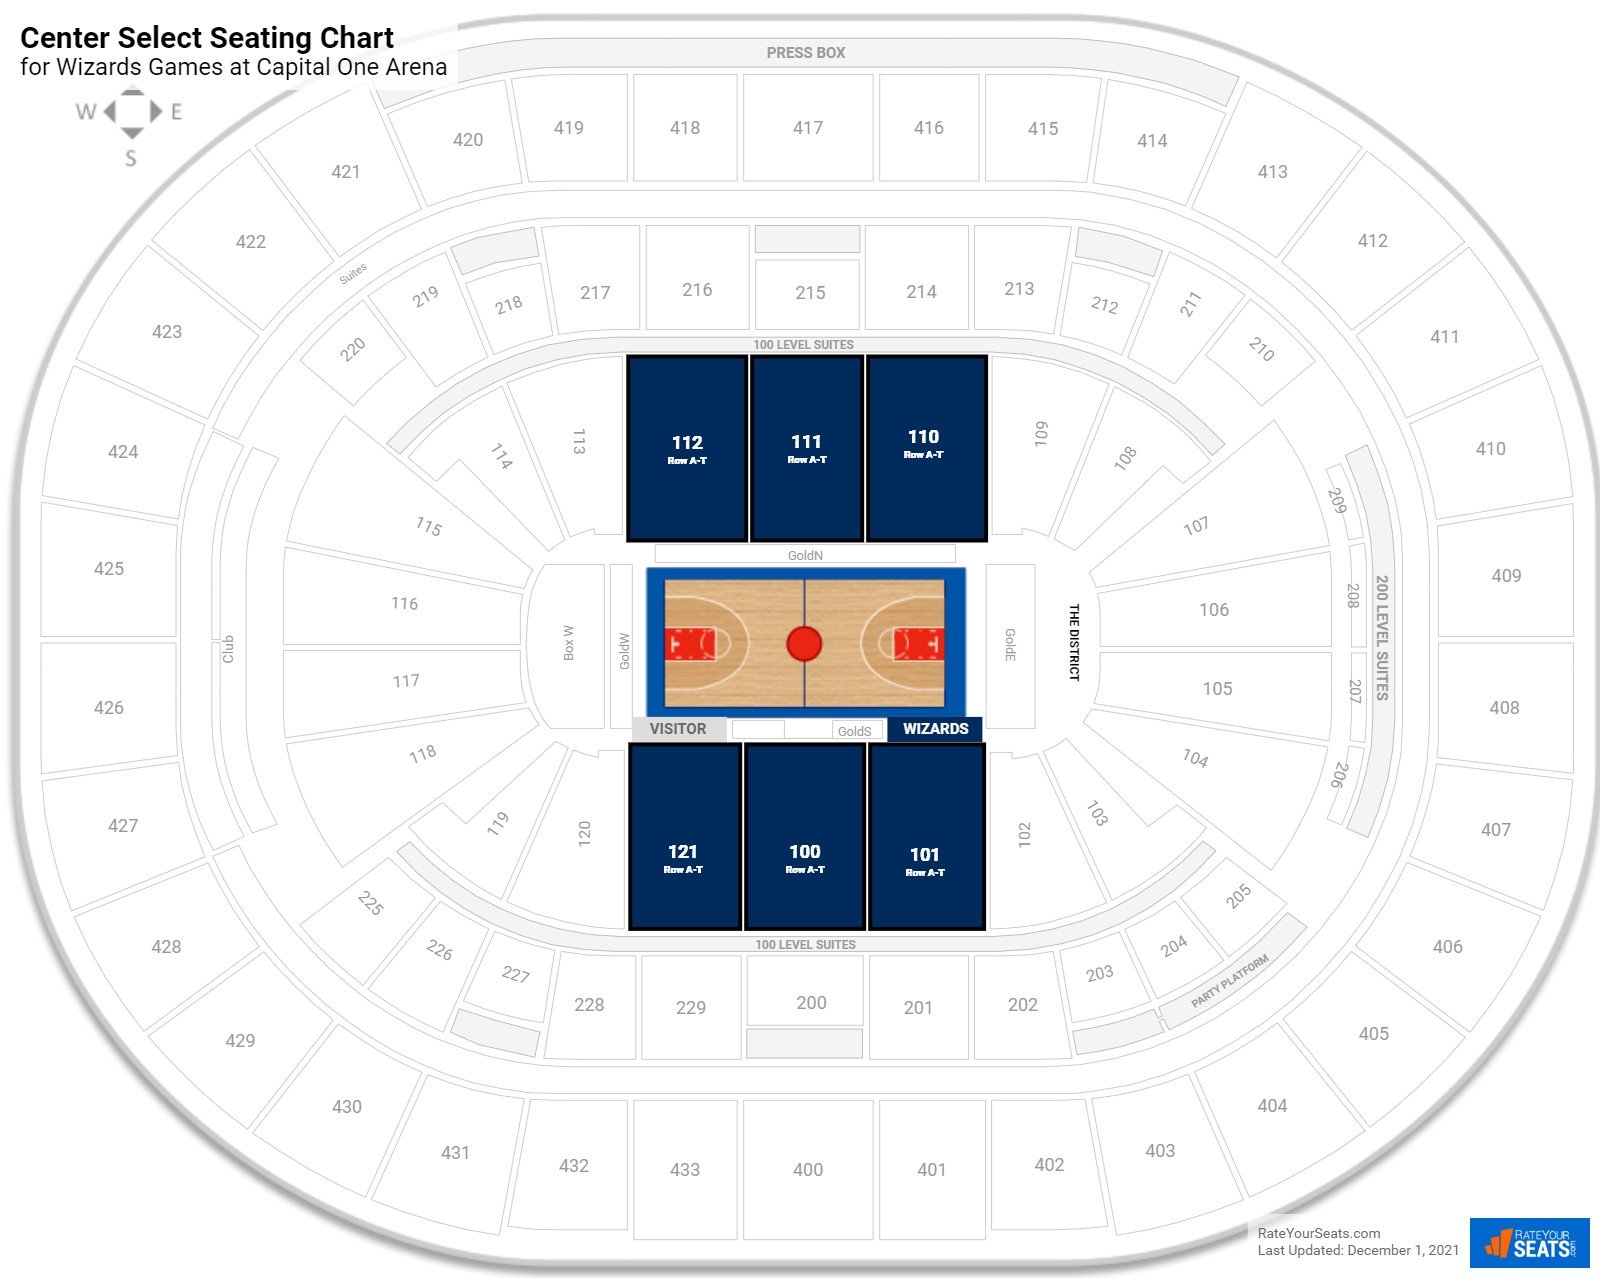 Wizards Center Select Seating Chart at Capital One Arena